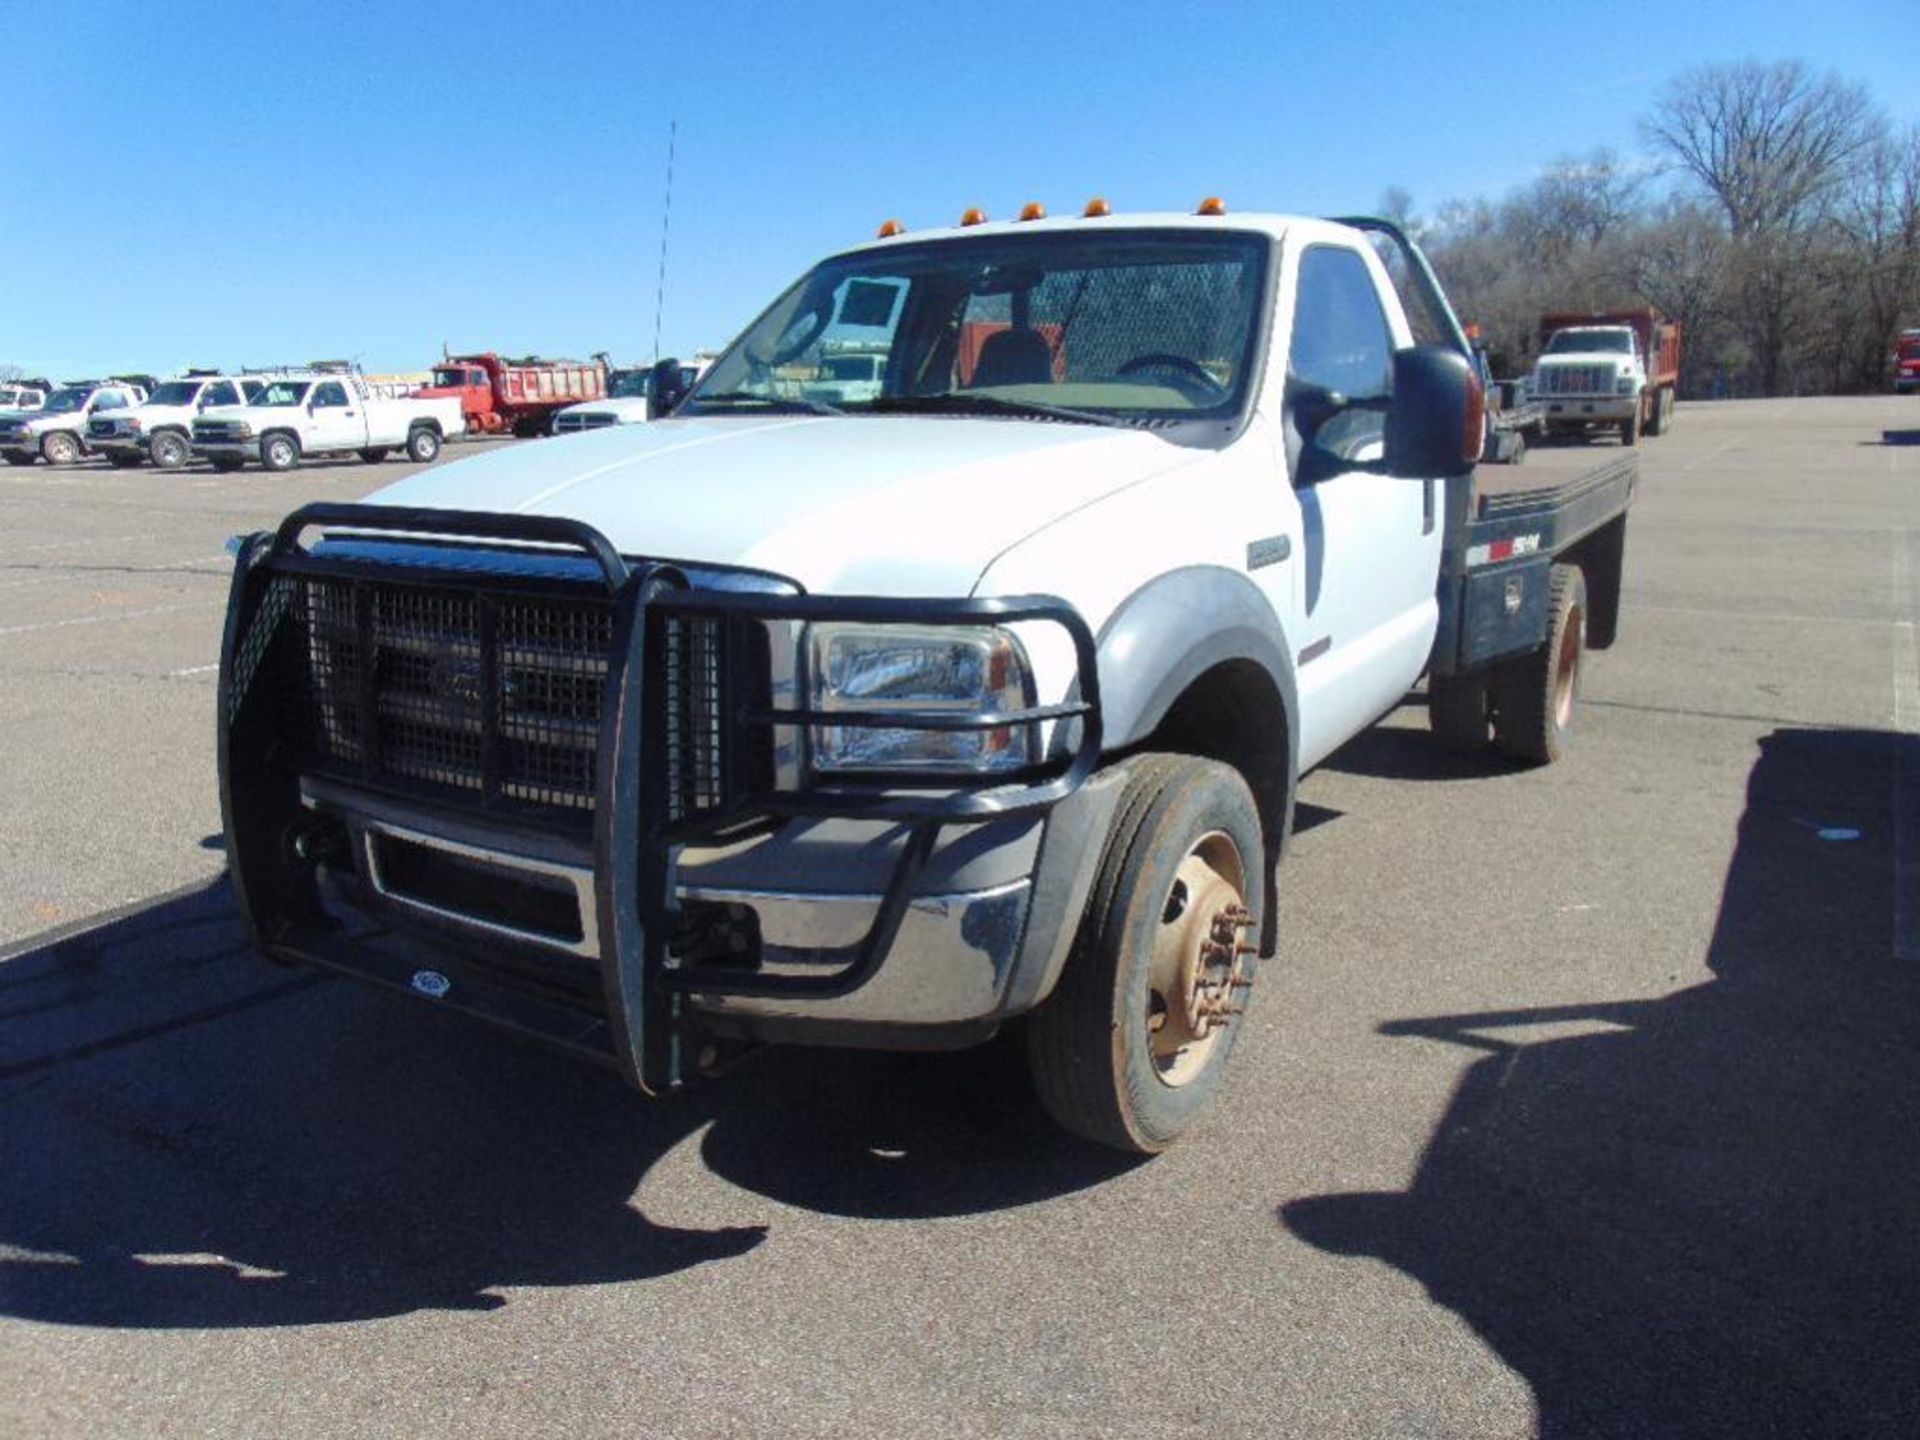 2005 Ford F450 4x4 Flatbed s/n 1fdxf47p55ec97926, 6.0 pwr stroke eng, auto trans, 2 way hyd,od reads - Image 3 of 5